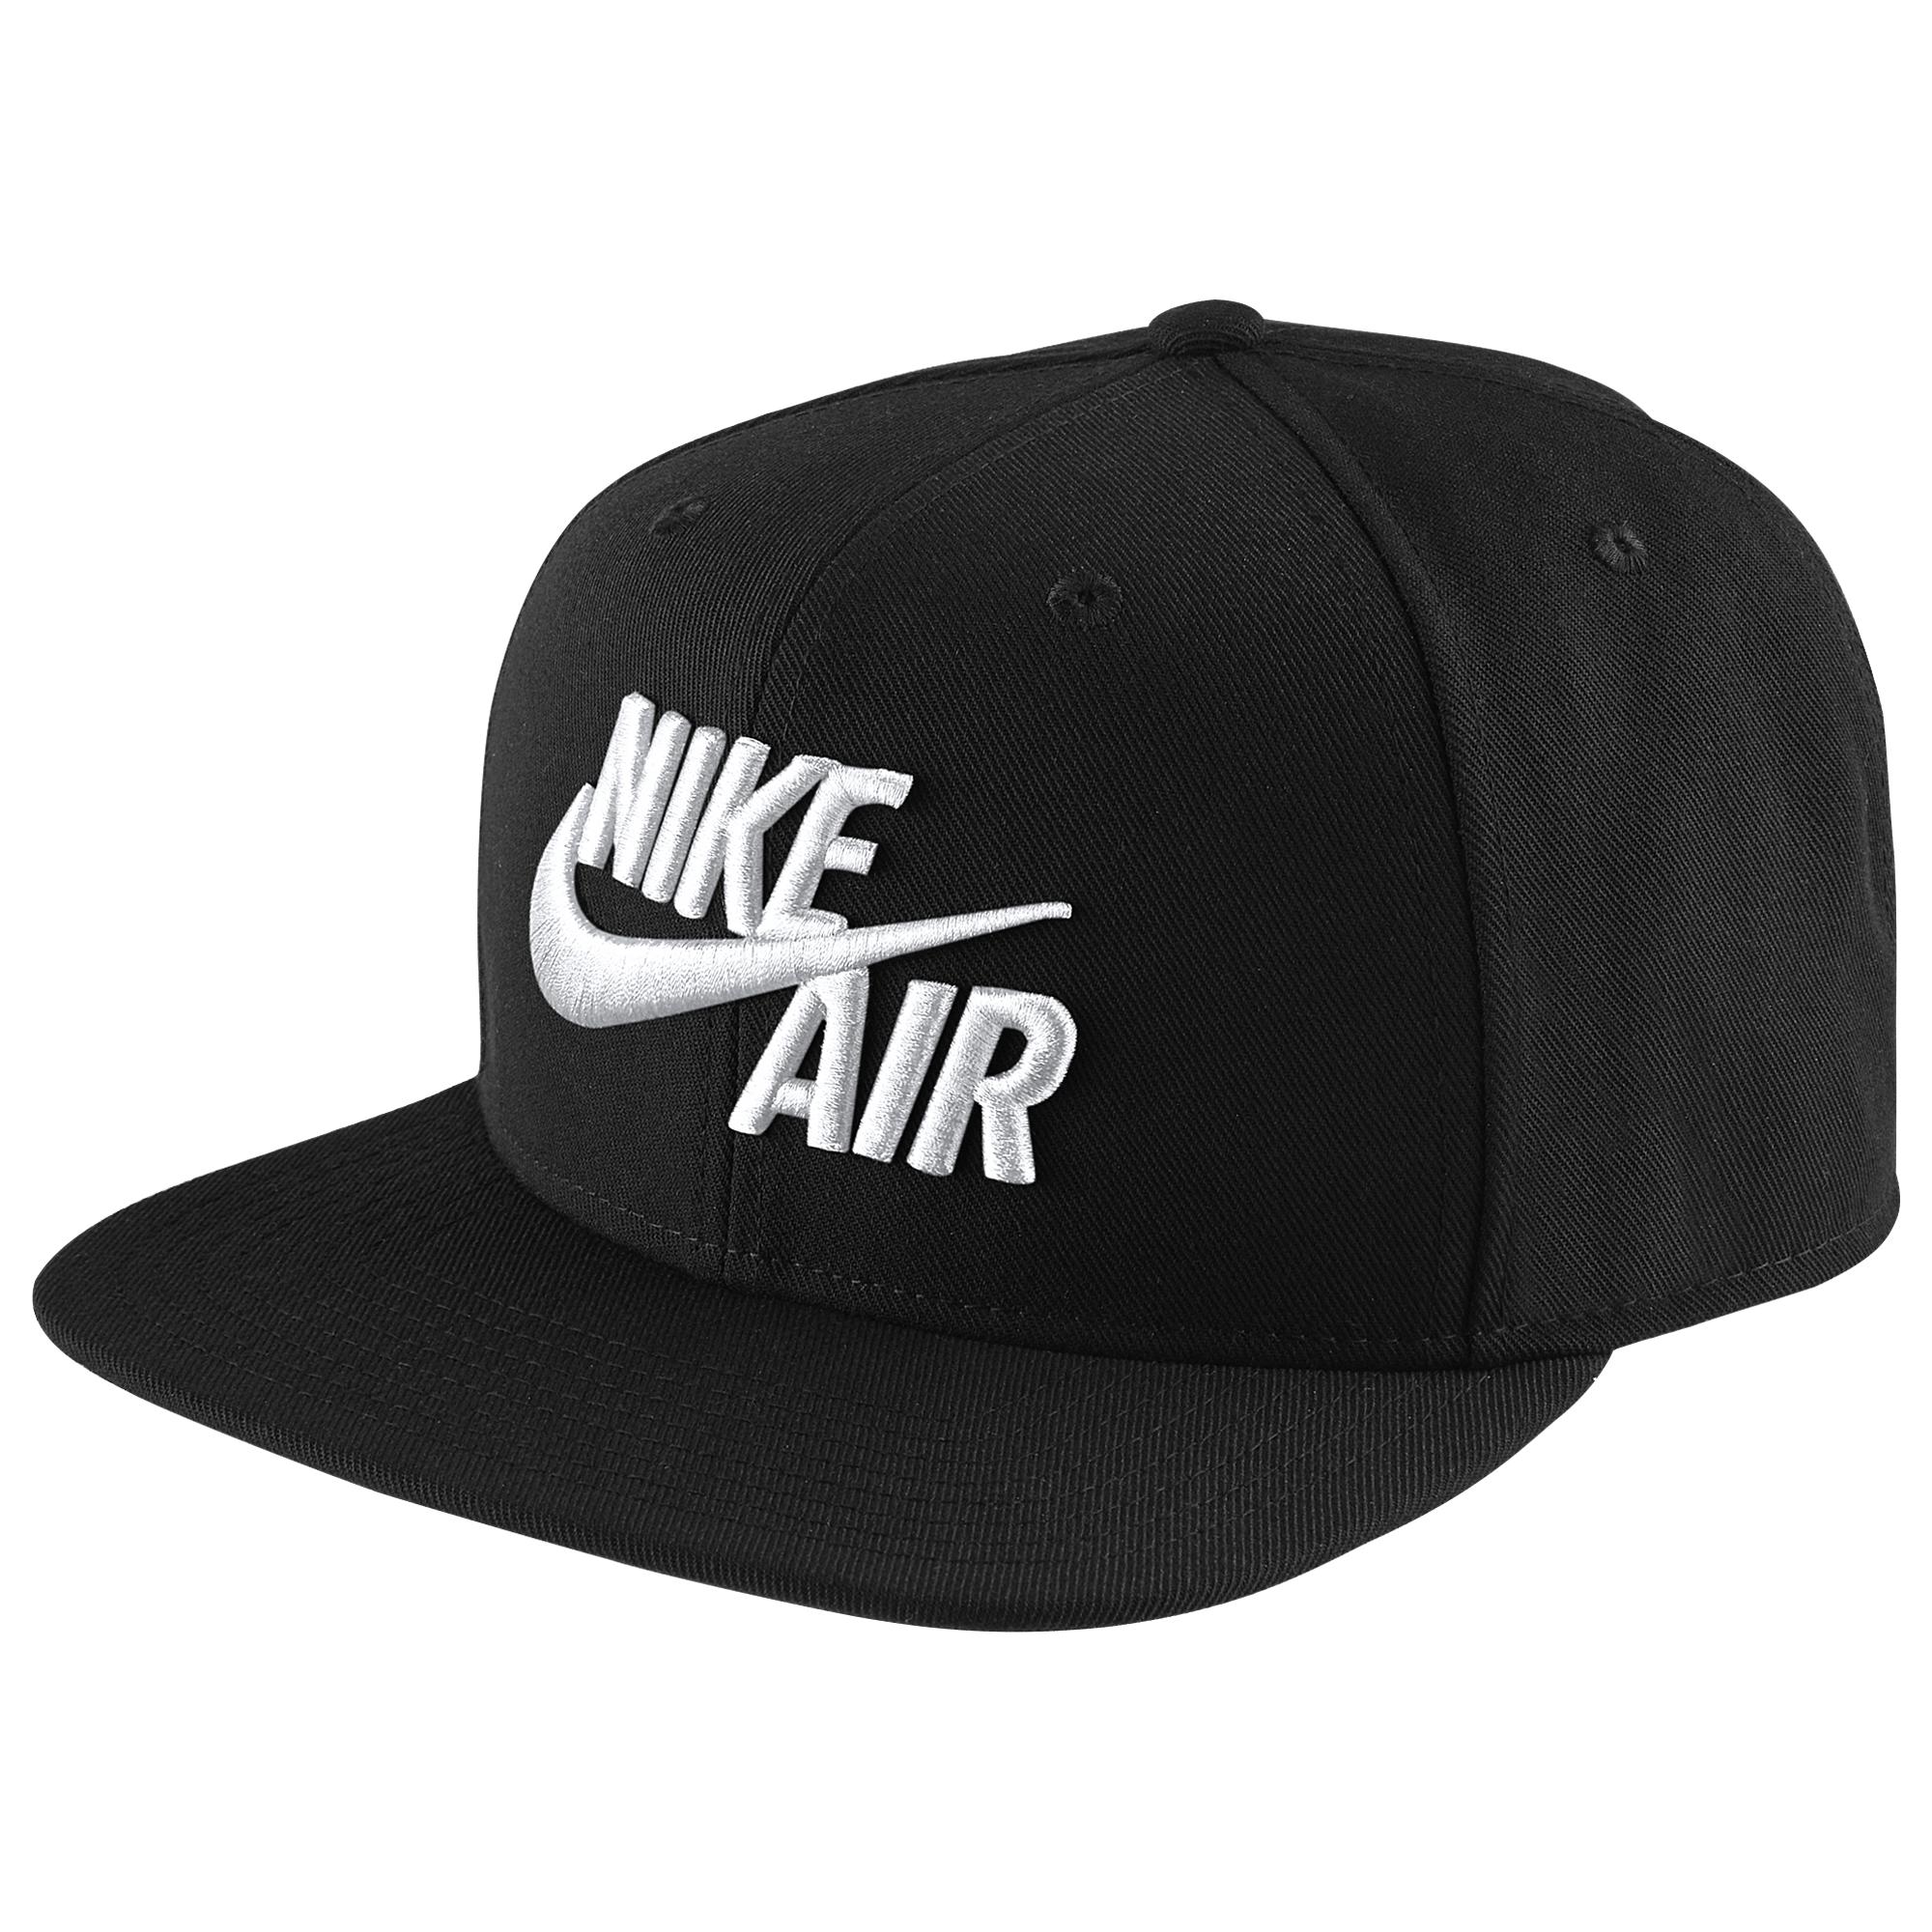 Nike Air Pro Classic Adjustable Cap in Black for Men - Save 20% - Lyst